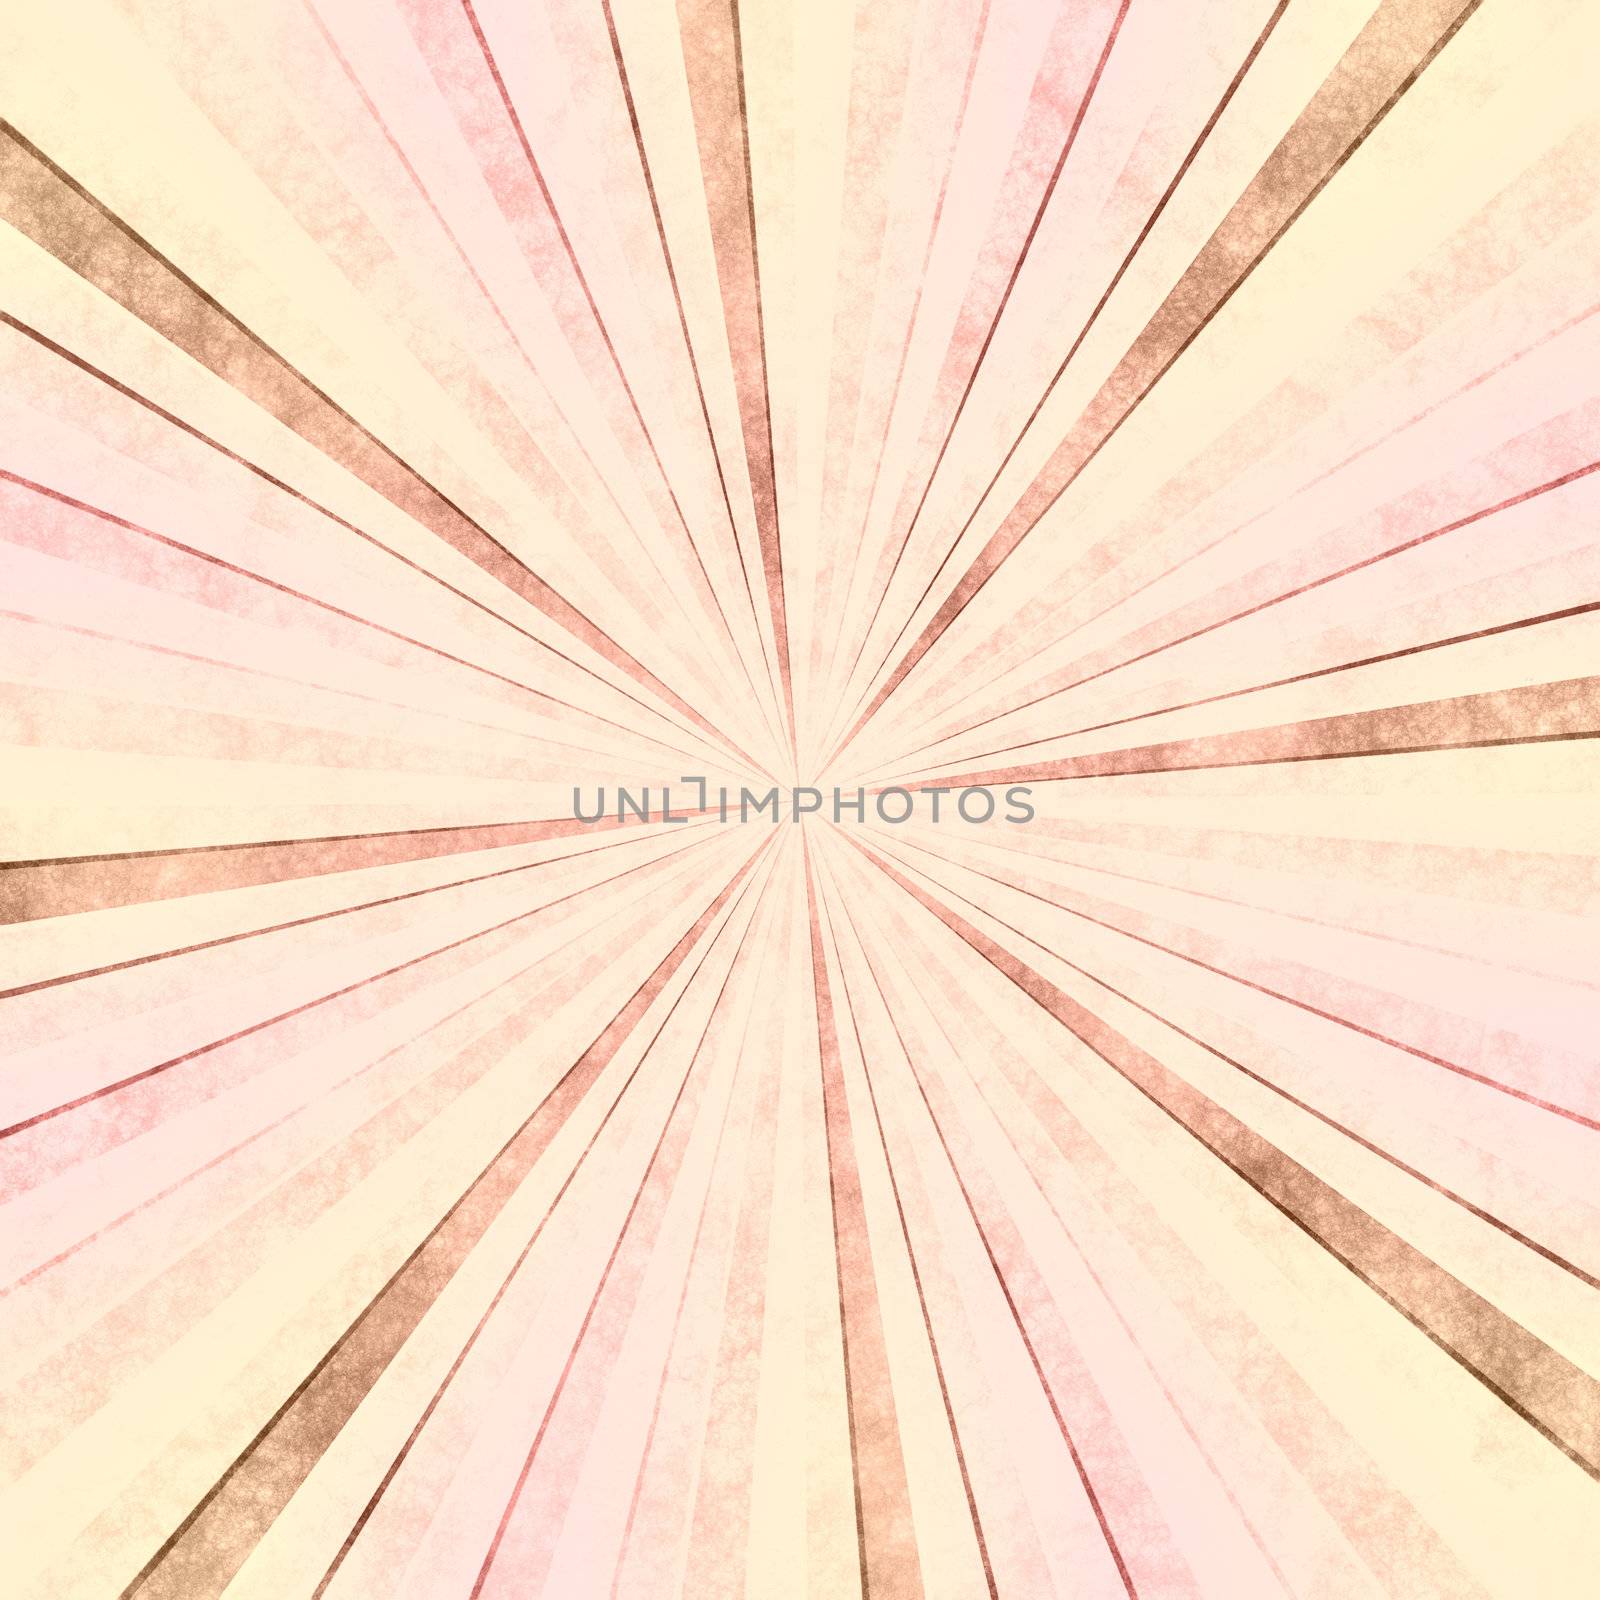 An image of a grunge star background